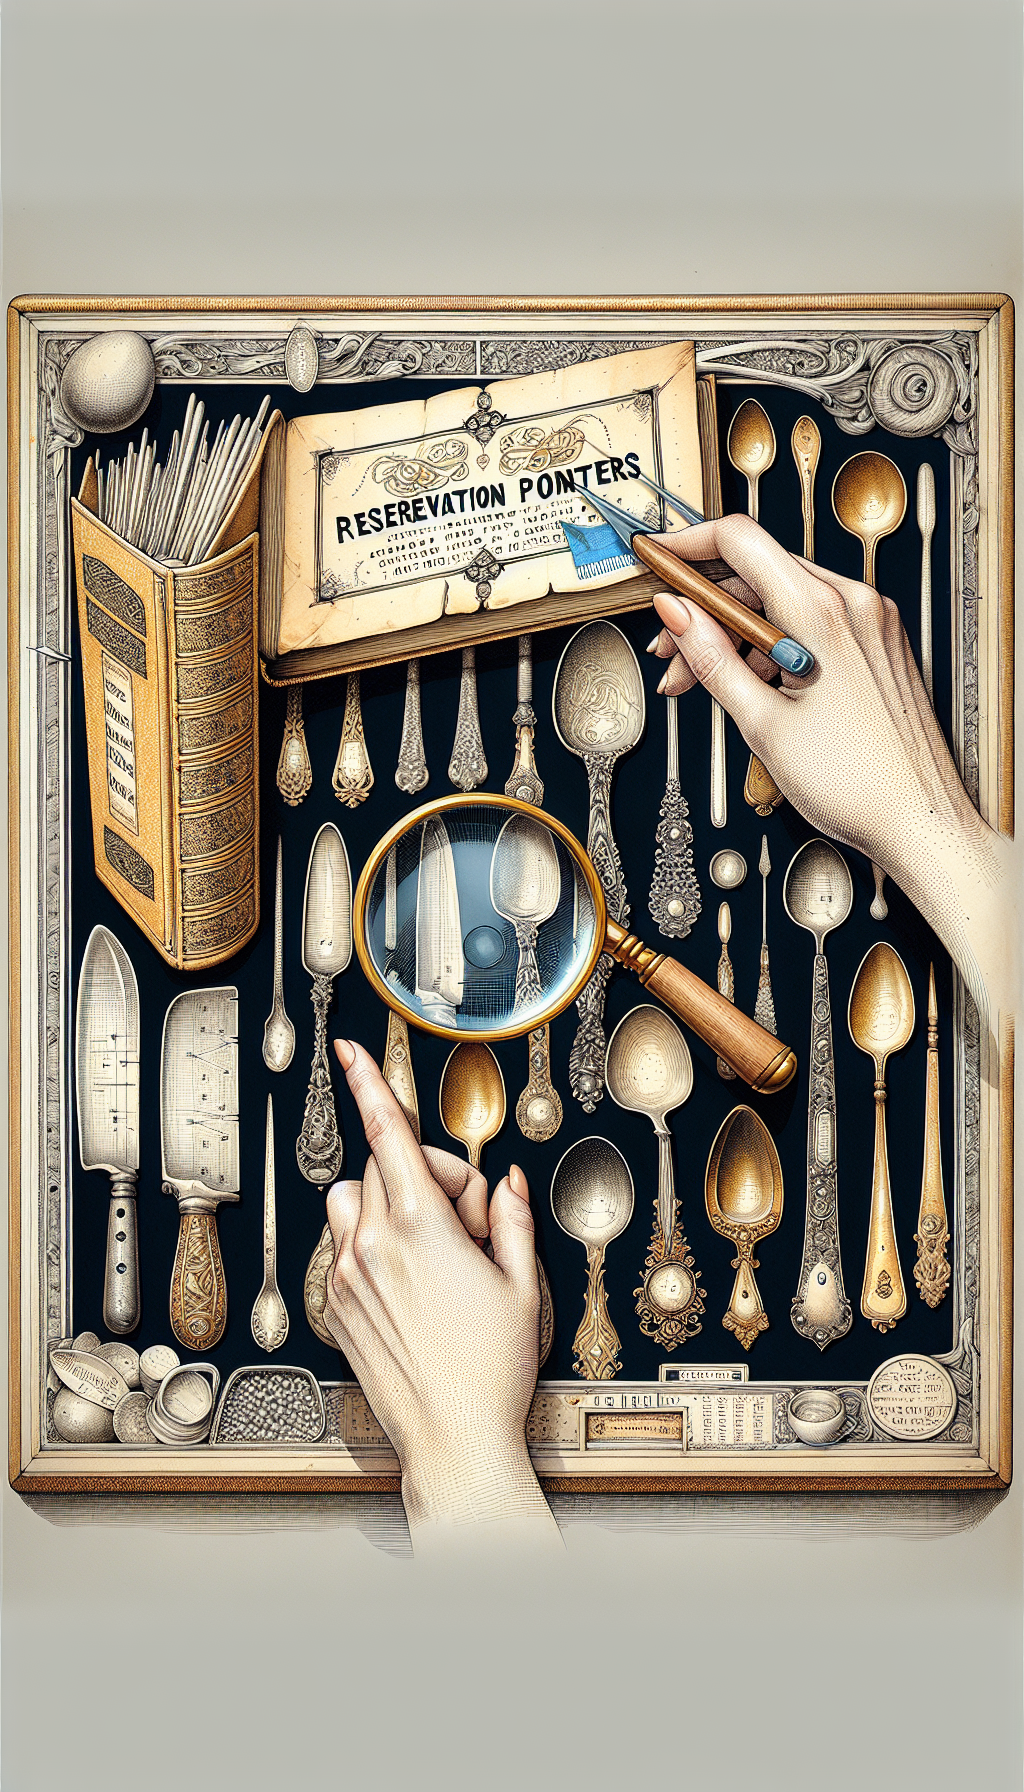 An intricate illustration frames a vintage golden book titled "Preservation Pointers," open to reveal an ornate spread of antique spoons, each labeled with delicate script. A magnifying glass hovers over, pinpointing fine engravings, as illustrated hands demonstrate careful polishing techniques. The border is playfully adorned with various preservation tools in a sketched, doodle-like style, contrasting the central hyper-realistic imagery.